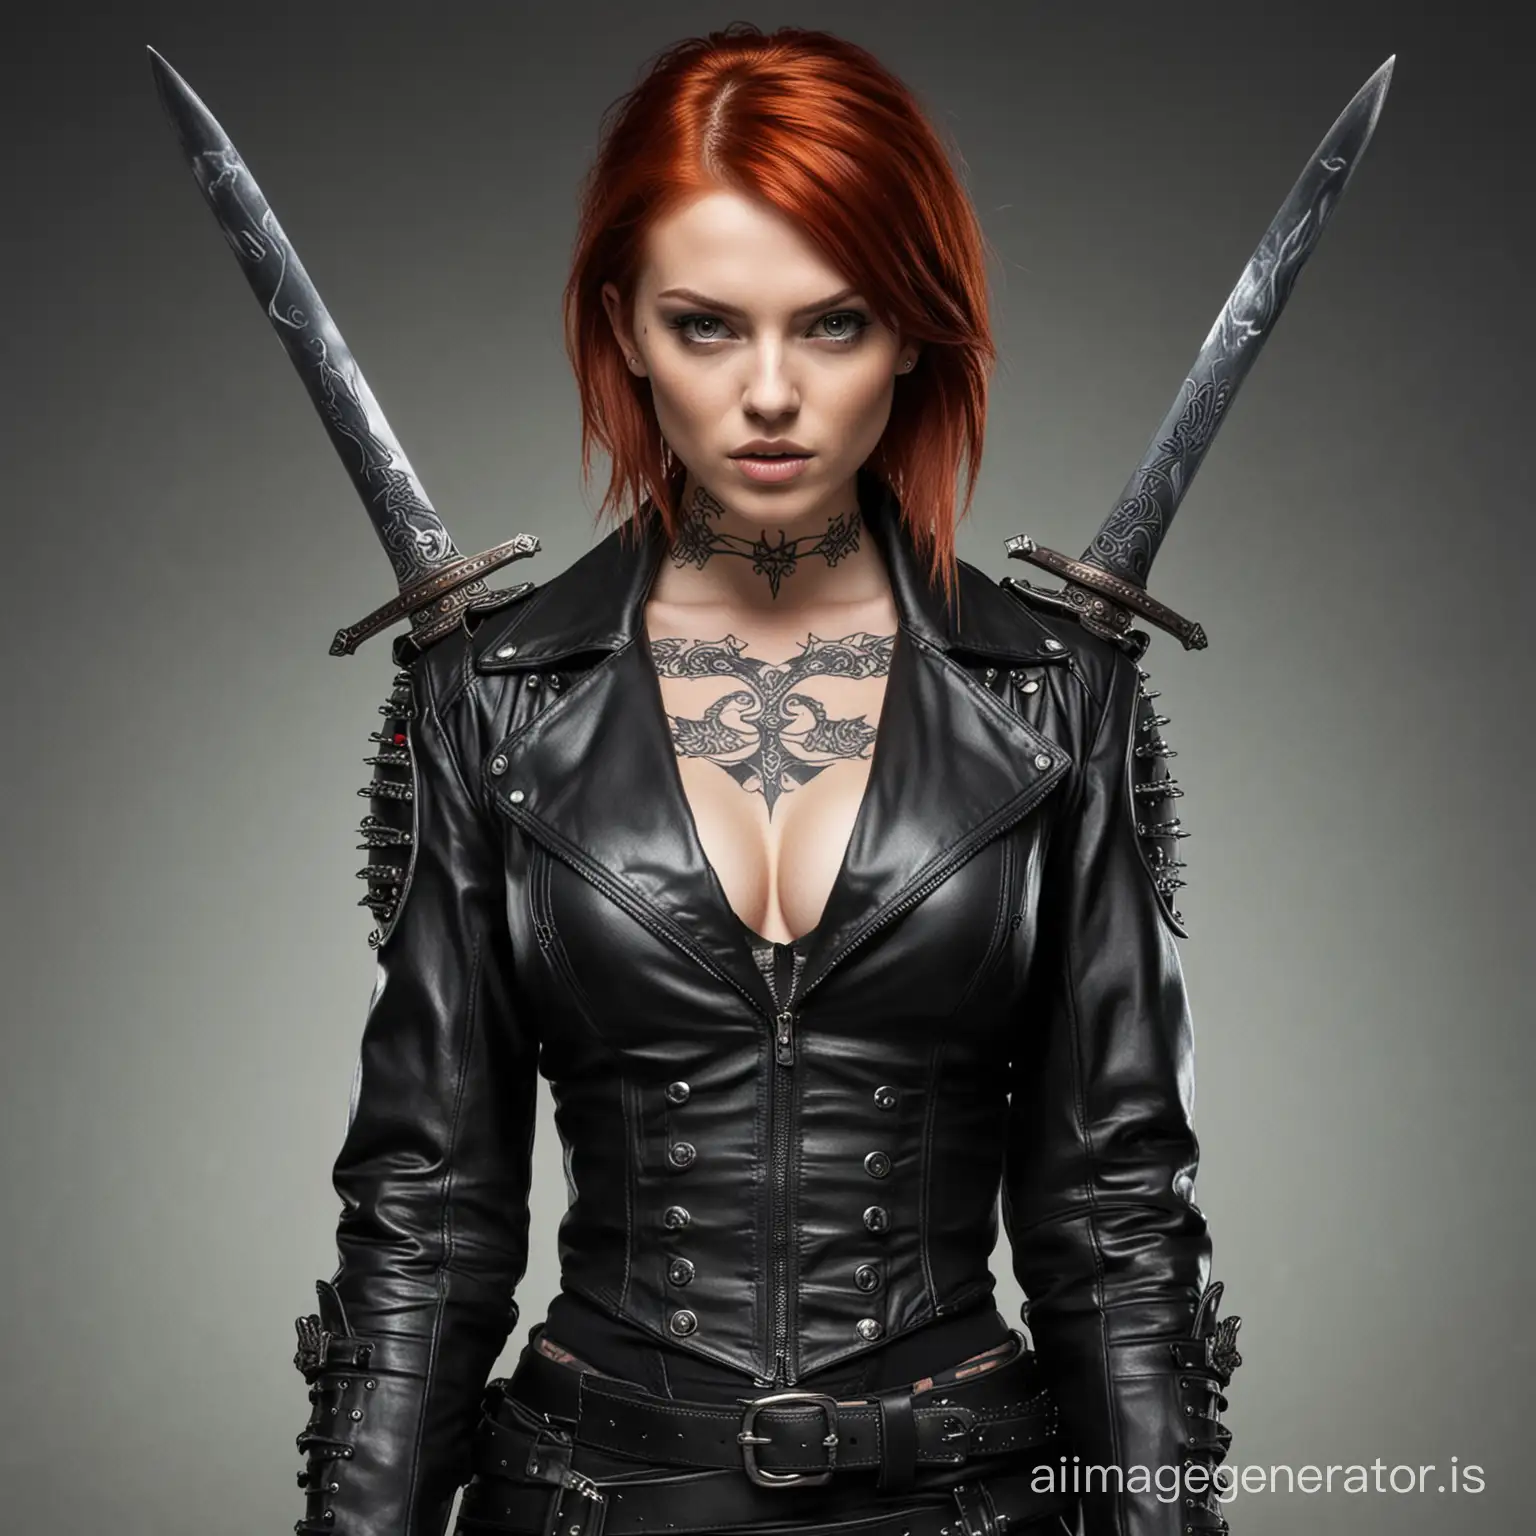 FieryHaired-Warrior-in-Black-Leather-Dual-Swords-and-Intricately-Inked